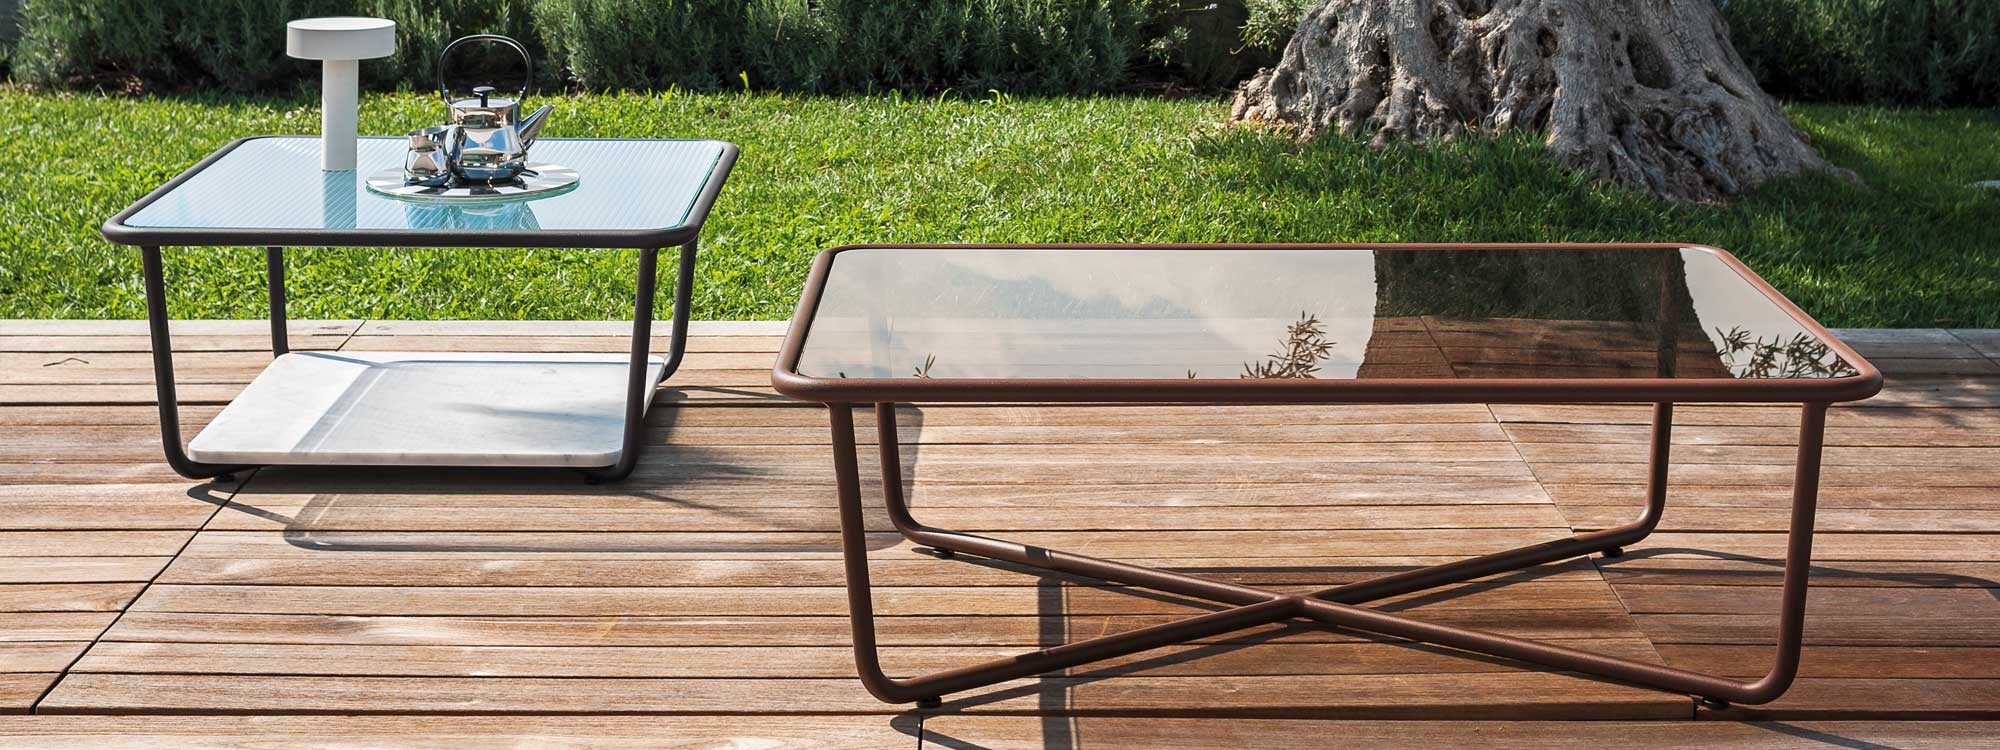 Pair of Sunglass retro low tables on wooden decking in front of olive tree trunk.